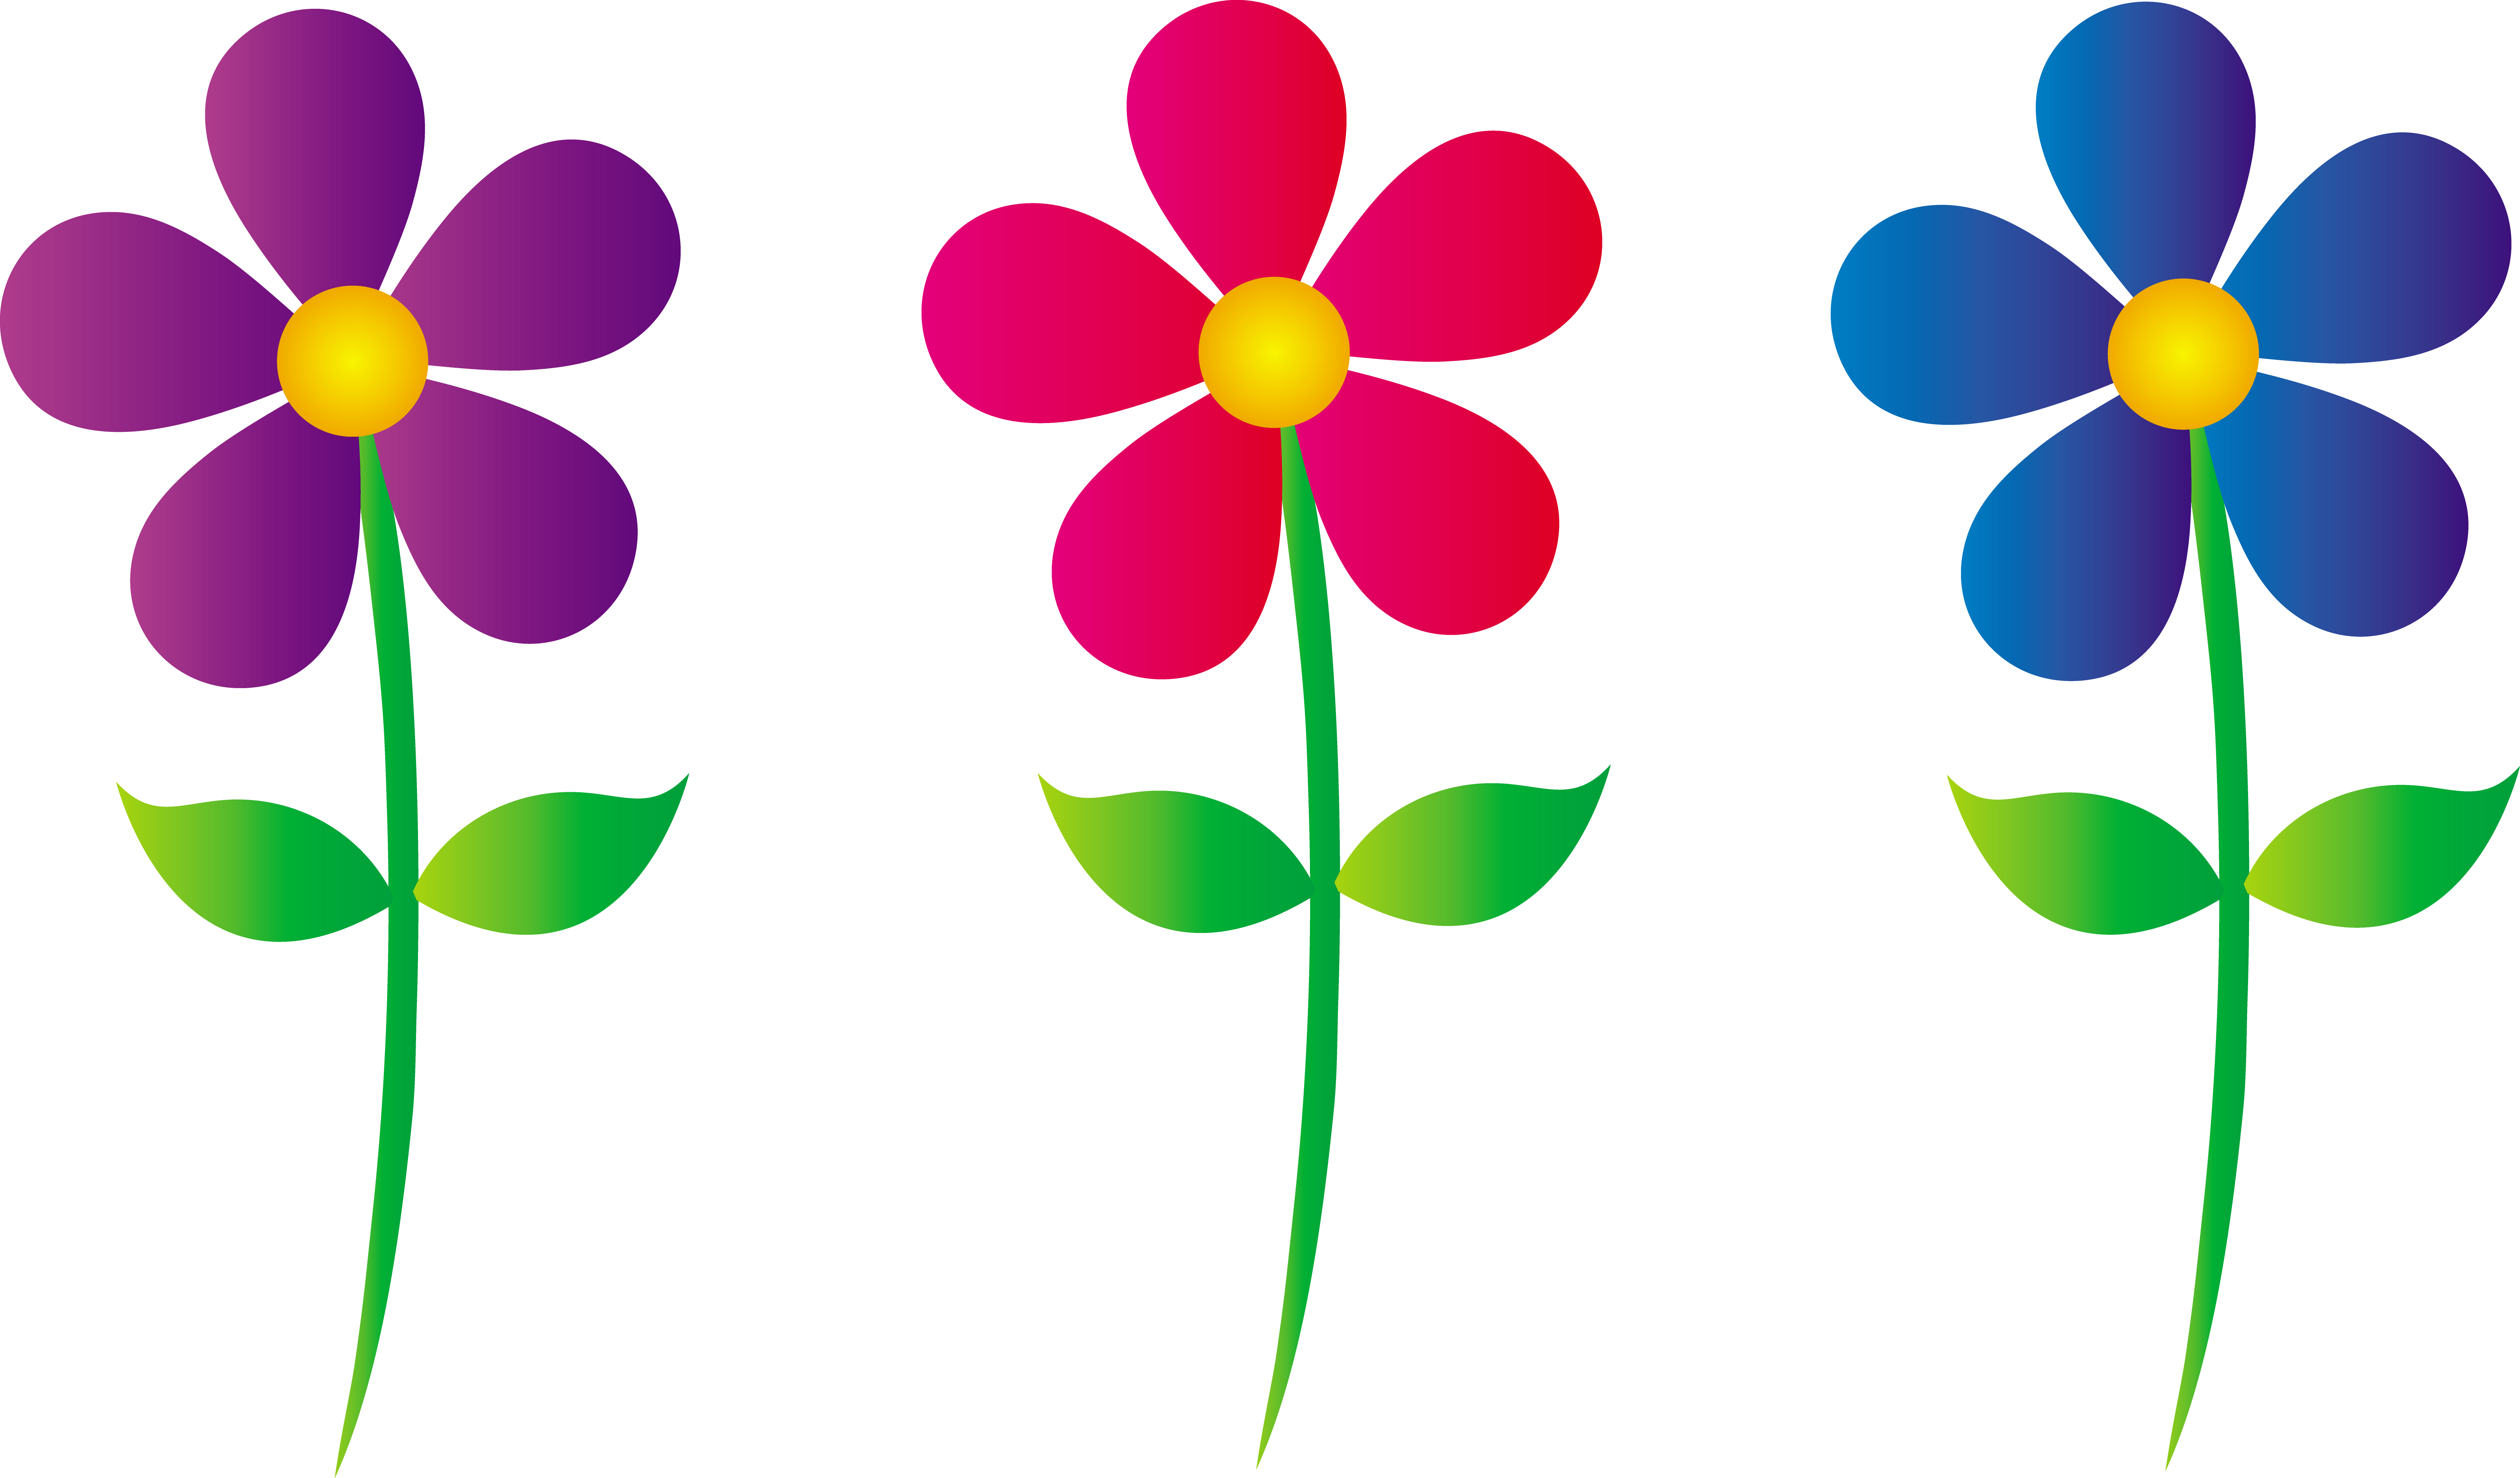 Free clipart images of flower